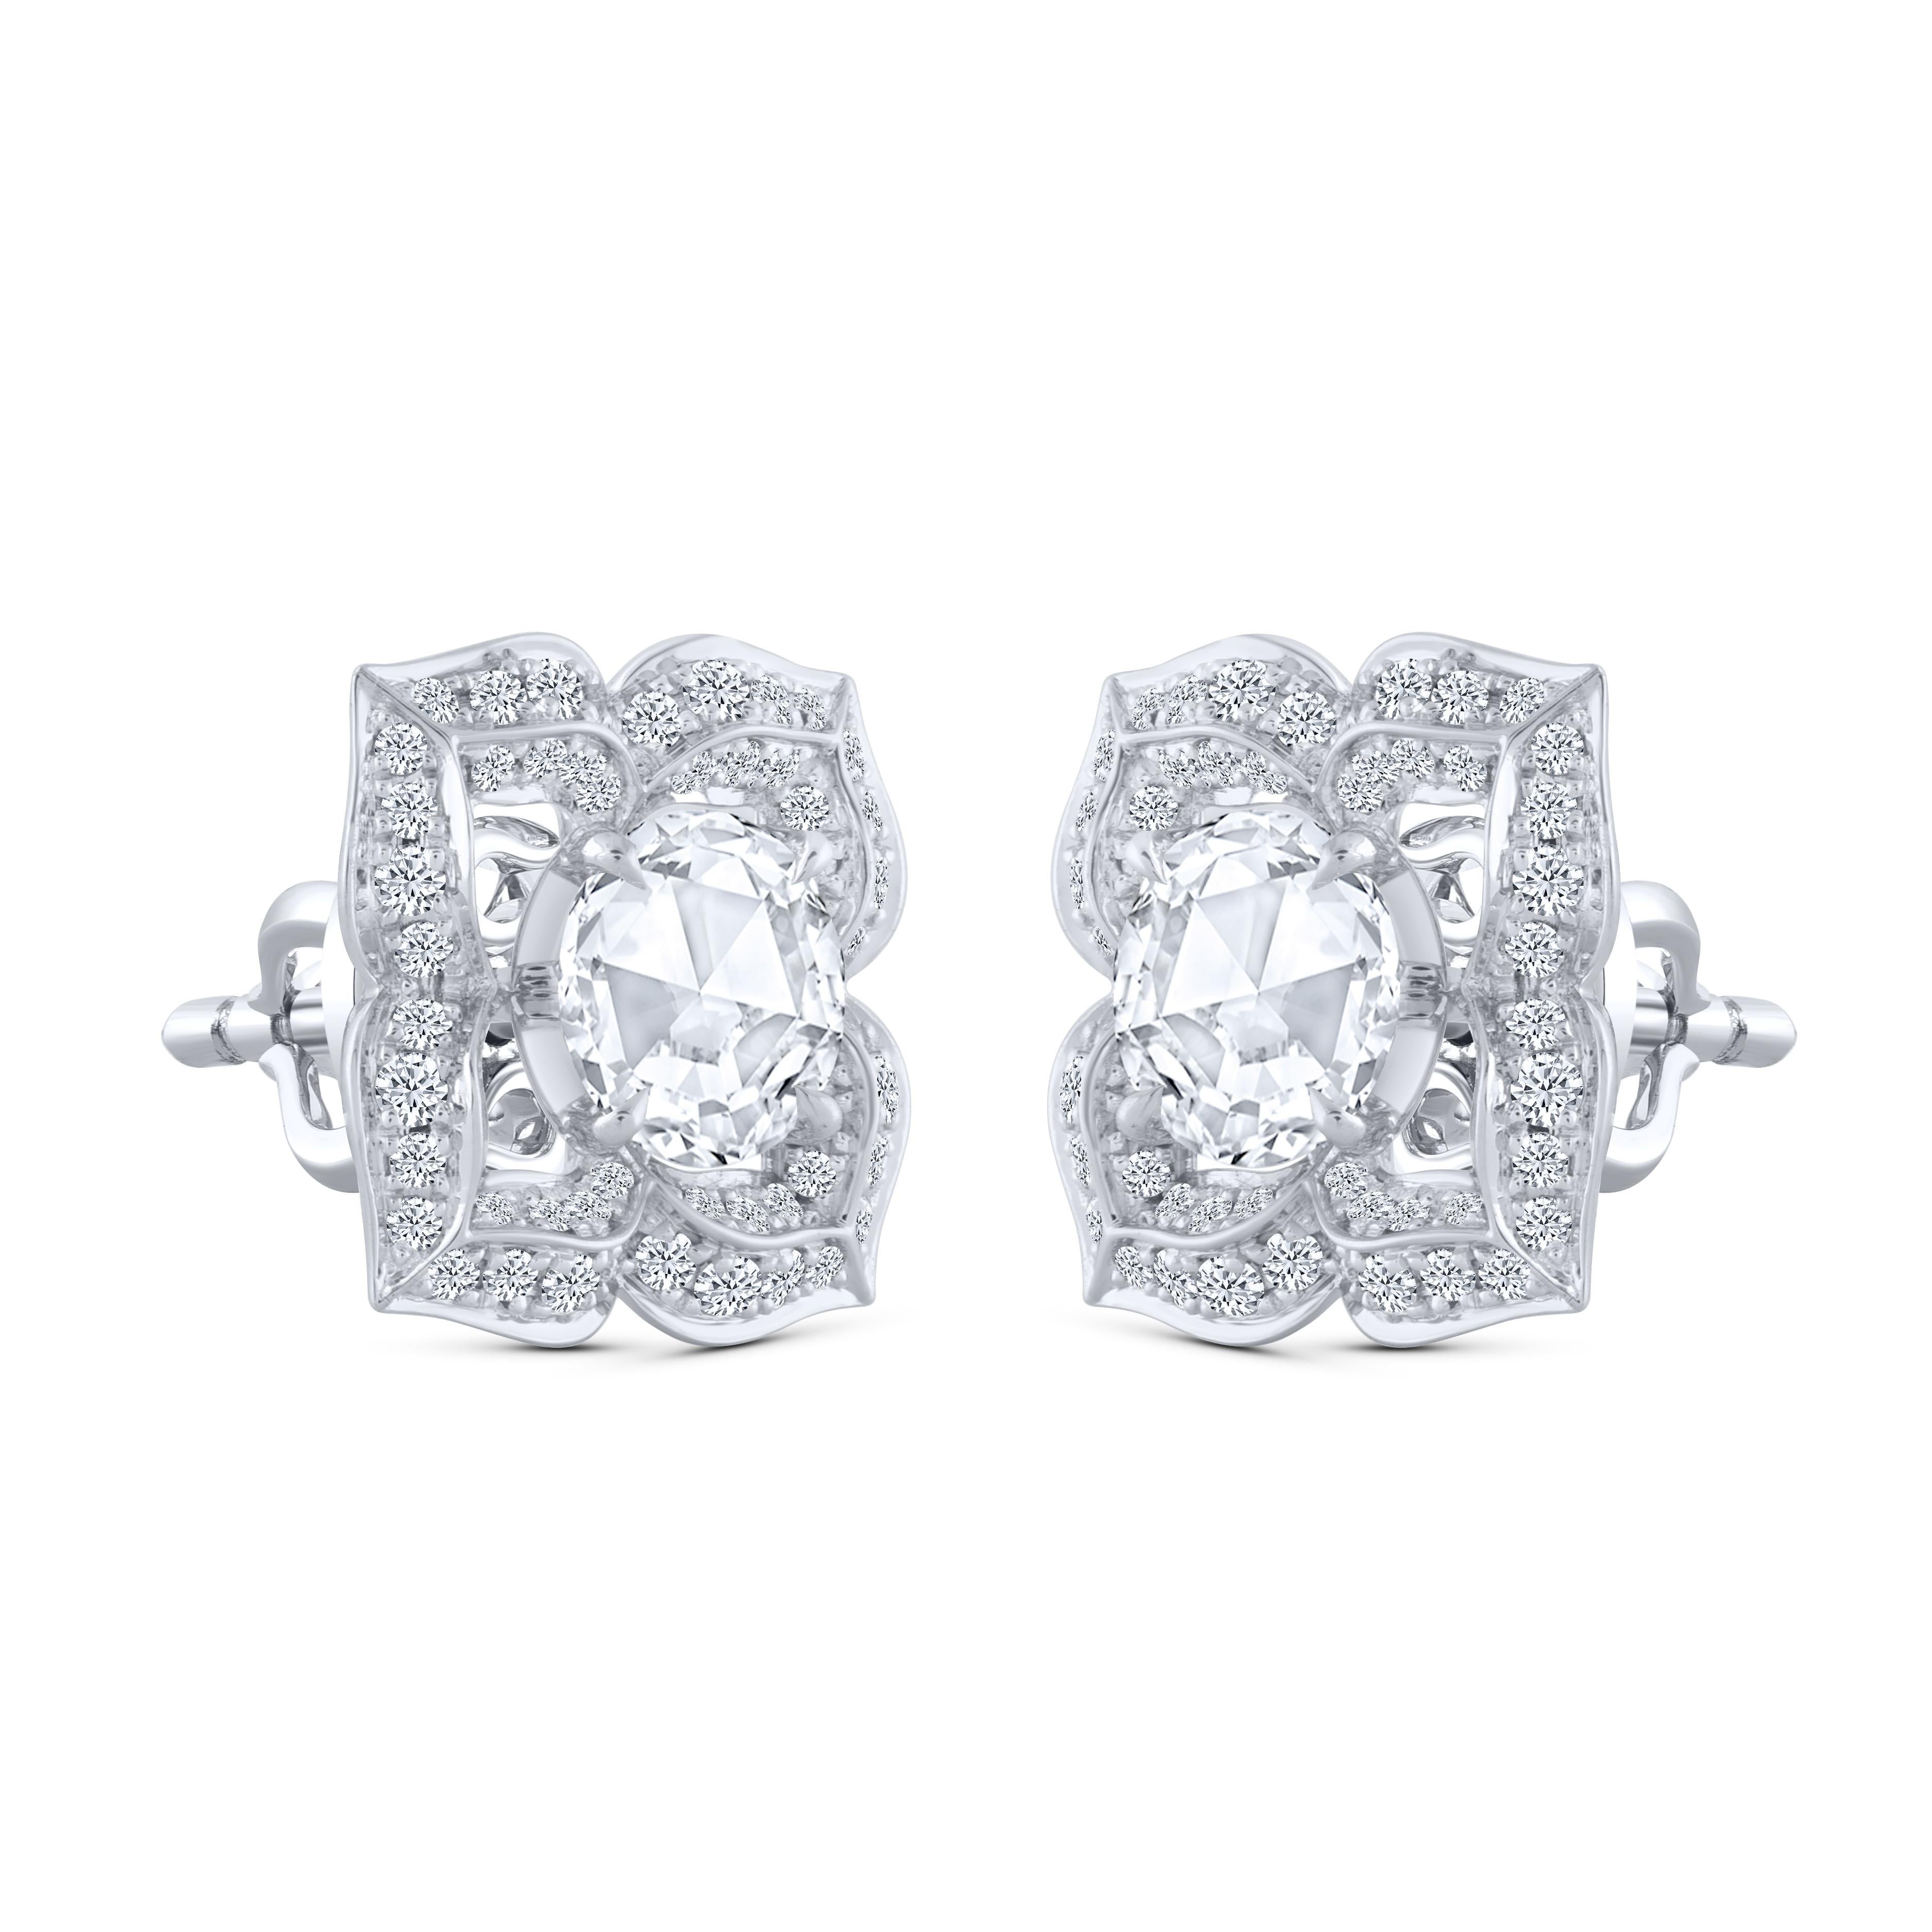 Contemporary Harakh 0.94 Carat Brilliant and Rose Cut Diamond 18kt White Gold Stud Earrings For Sale